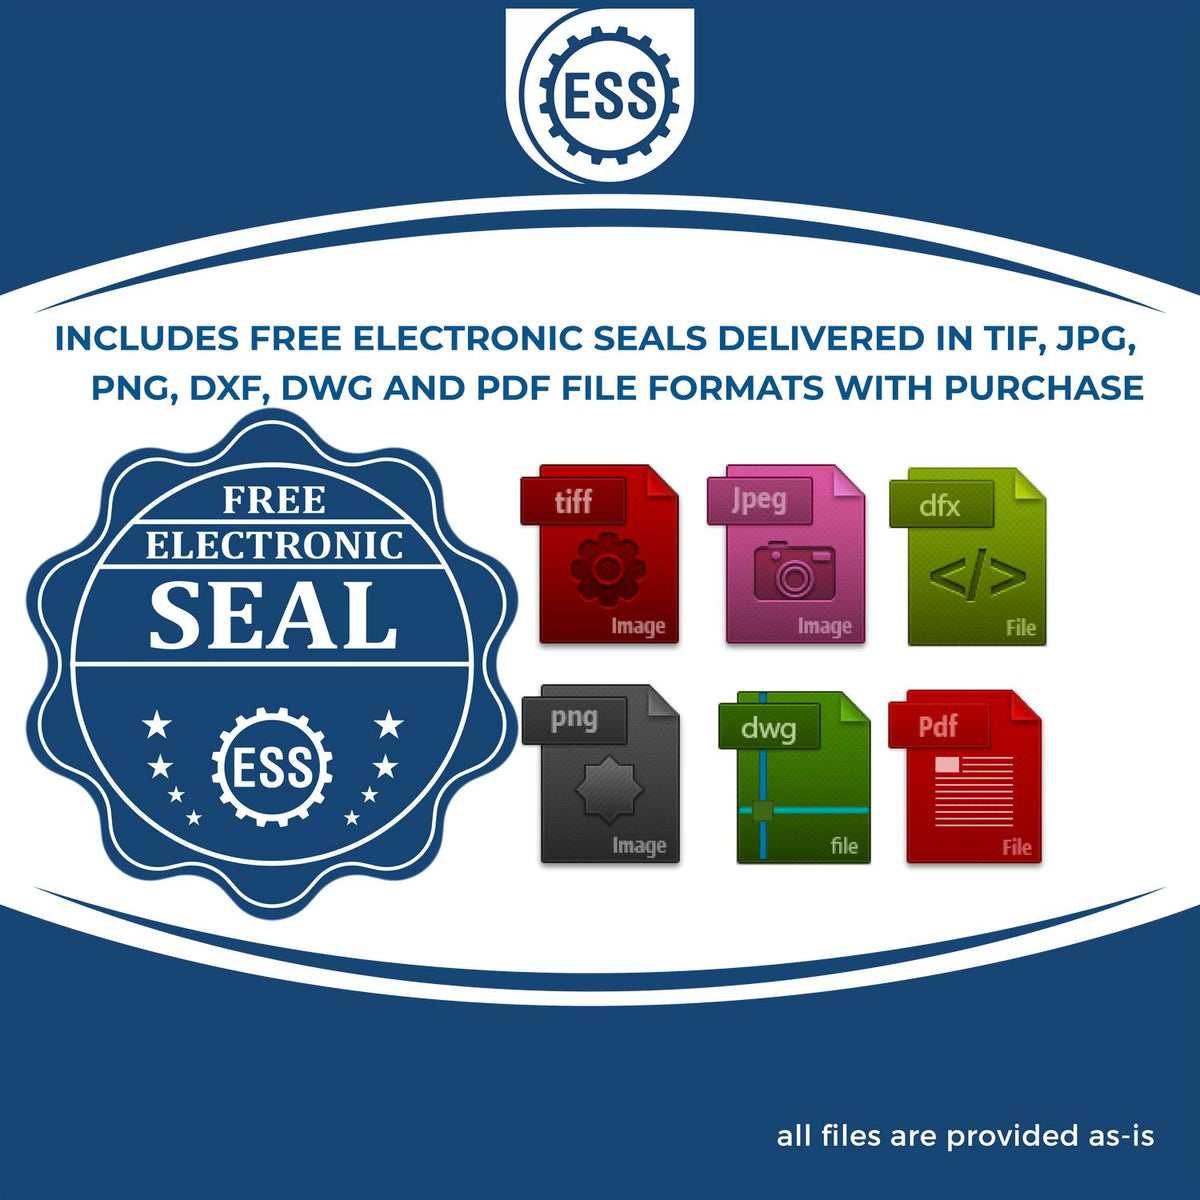 An infographic for the free electronic seal for the State of Delaware Extended Long Reach Engineer Seal illustrating the different file type icons such as DXF, DWG, TIF, JPG and PNG.